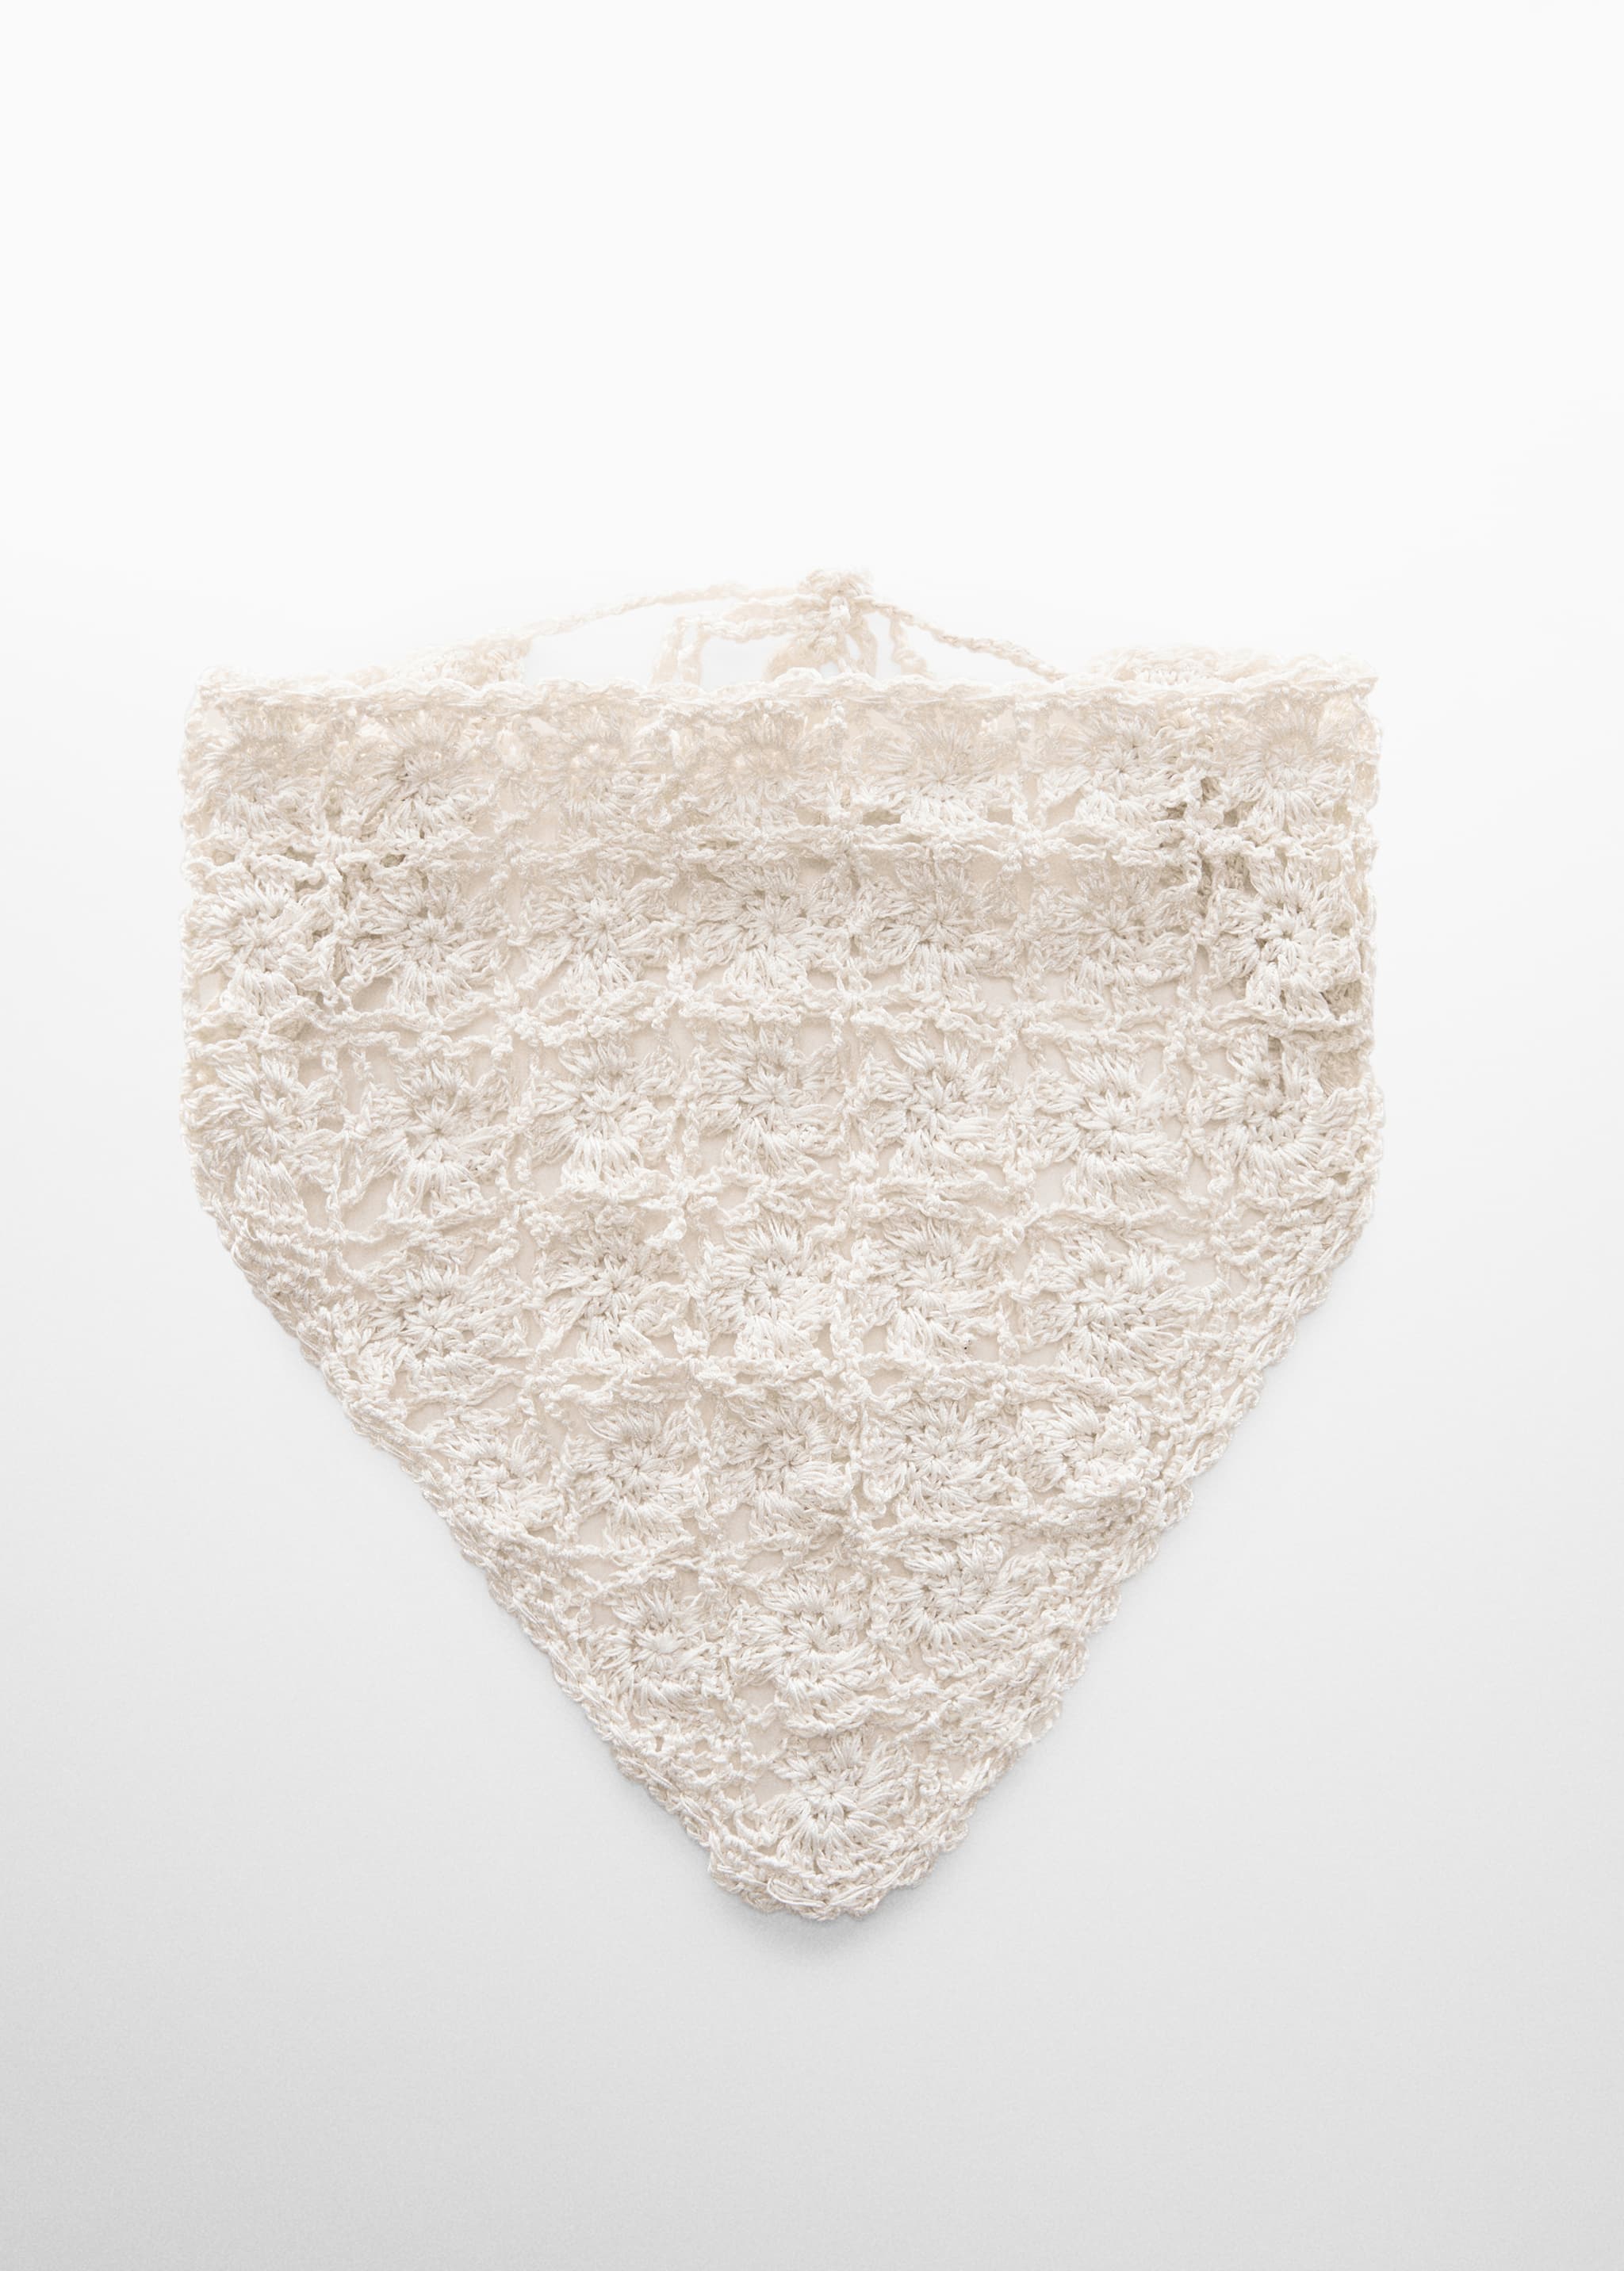 Crochet knit handkerchief - Article without model